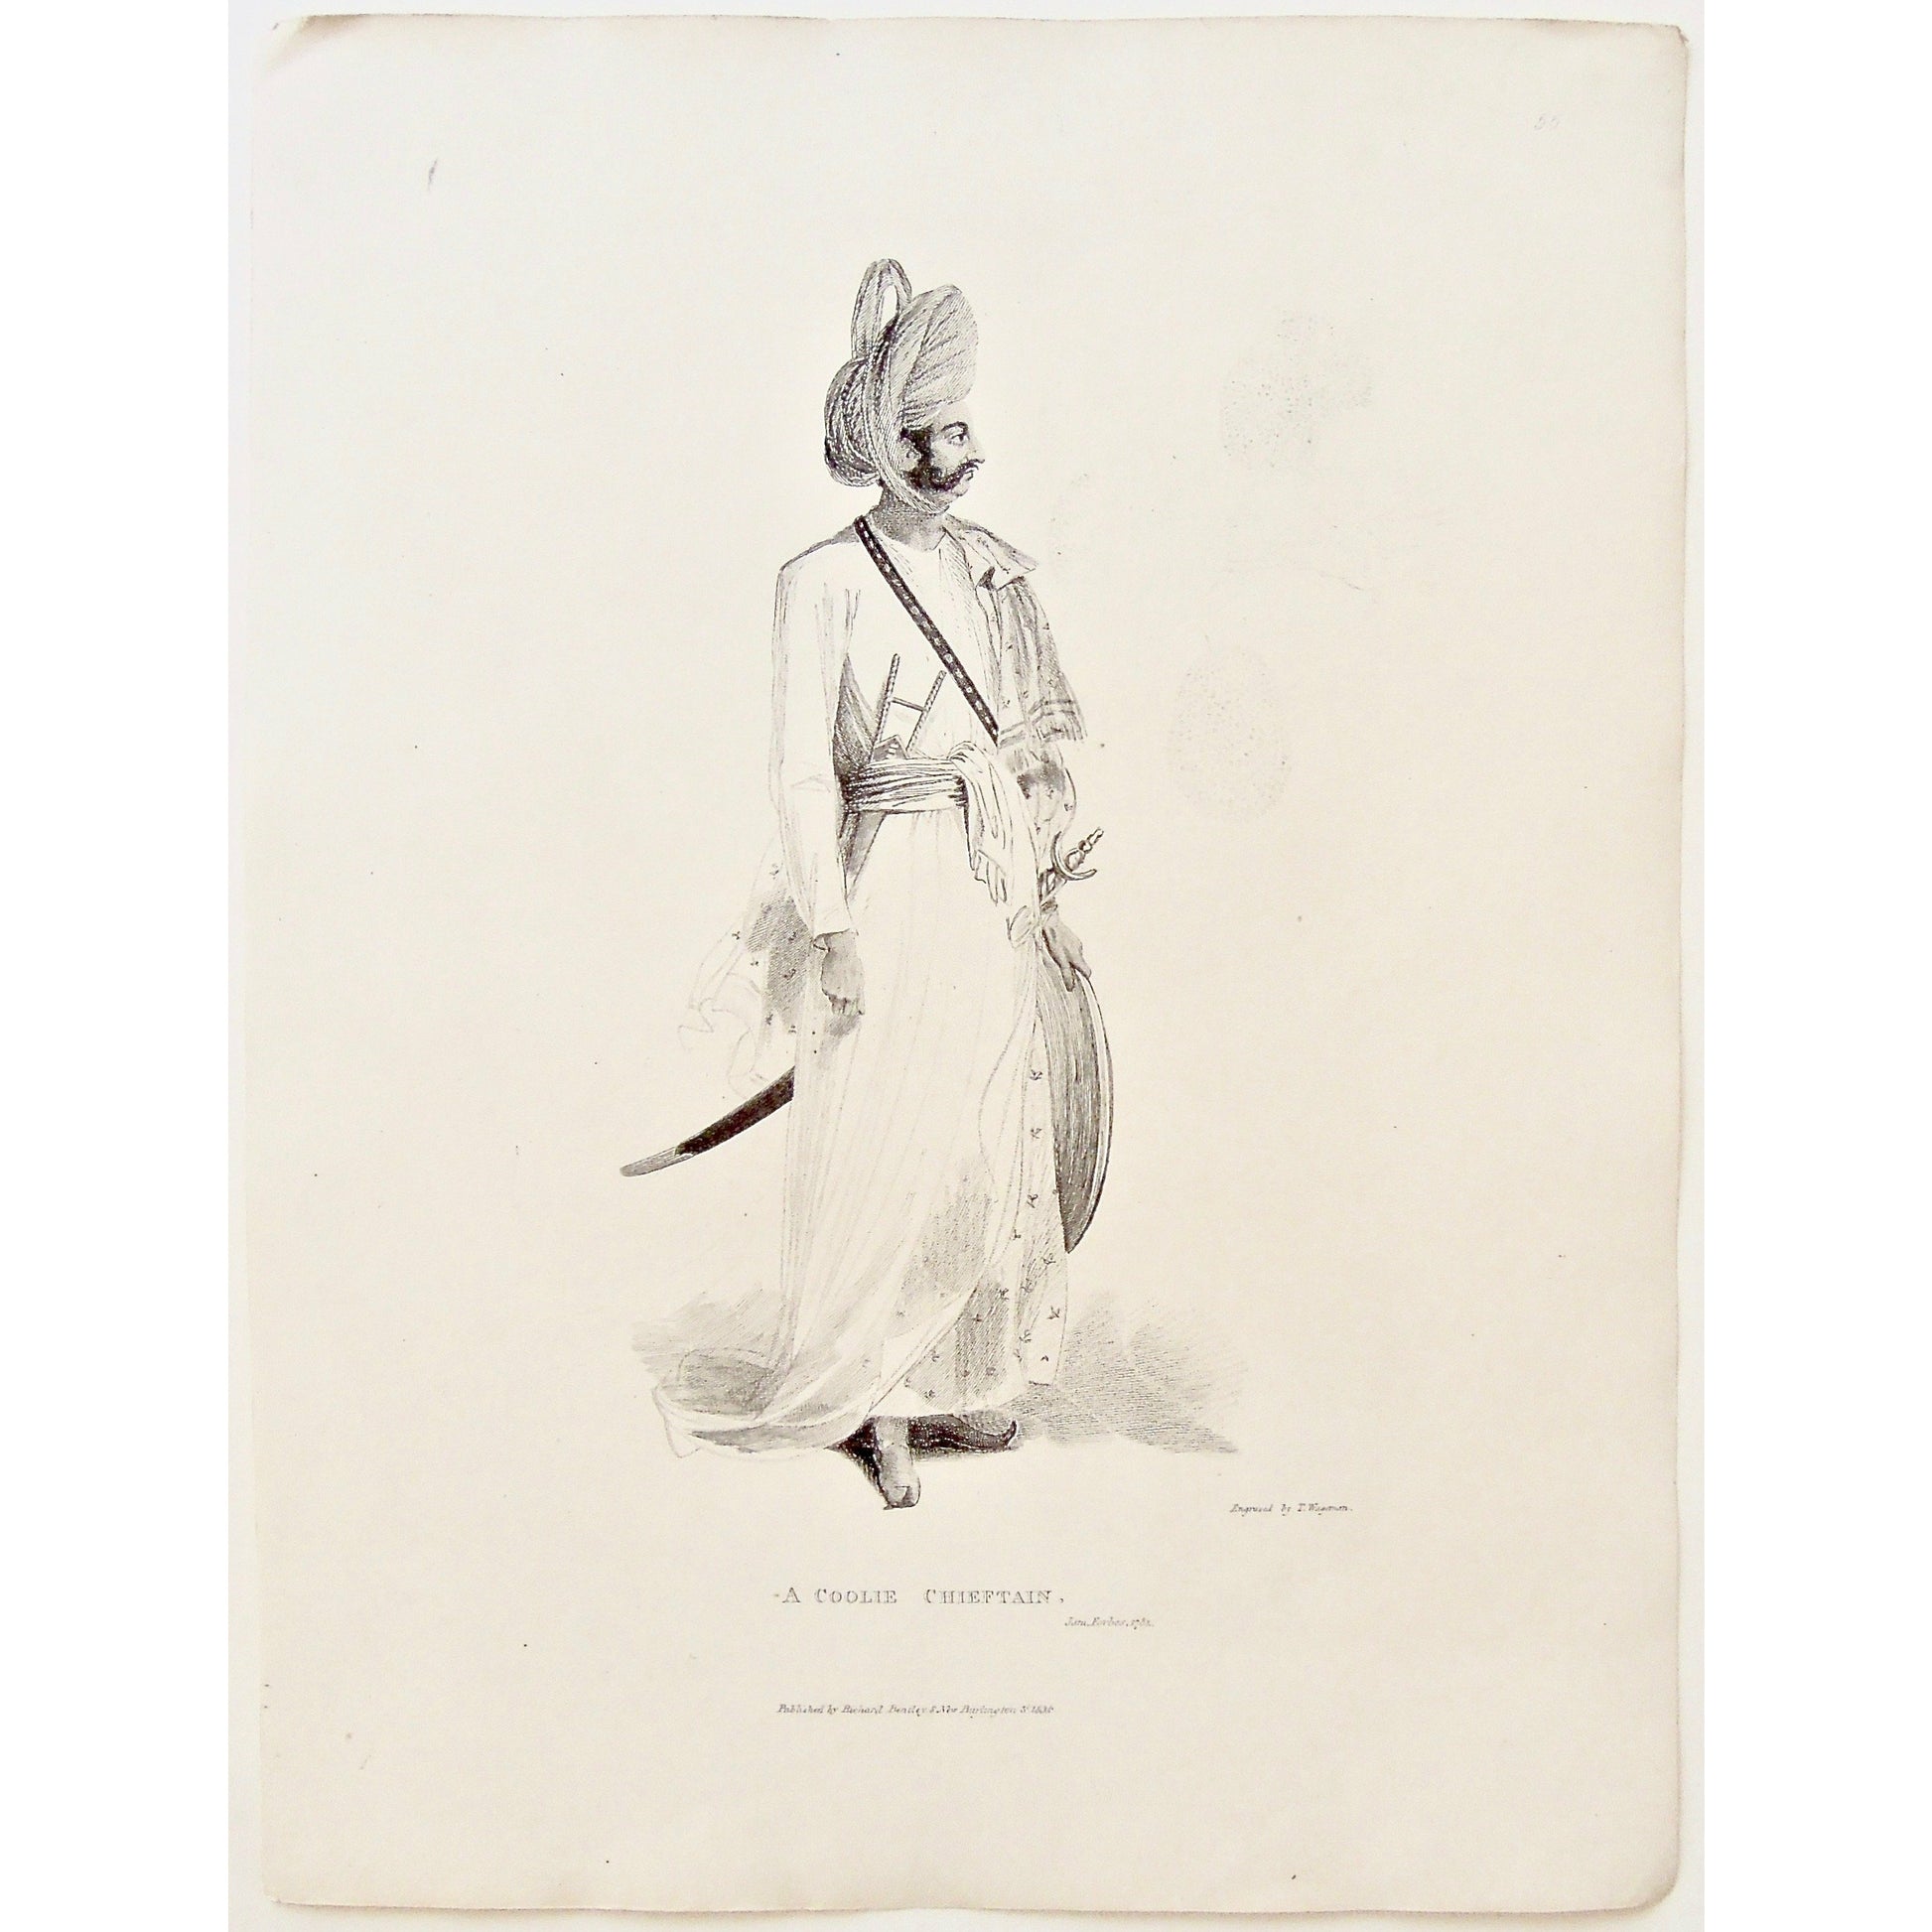 Coolie Chieftain, Coolie, Chief, Chieftain, Man, Portrait, Portraiture, Sword, Sheild, Clothes, Dress, attire, Head scarf, Head dress, traditional, India, Indian, James Forbes, Forbes, Eliza Rosée, Countess De Montalembert, Oriental Memoirs, Narrative of Seventeen Years Residence in India, Bentley, 8 New Burlington Street, London, Wageman Nichols & Son, 25 Parliament Street, 1781, 1834, Steel engraving, Antique Print, Antique Prints, Prints, Printmaking, Antique, Original, Rare, Rare books, Black and white